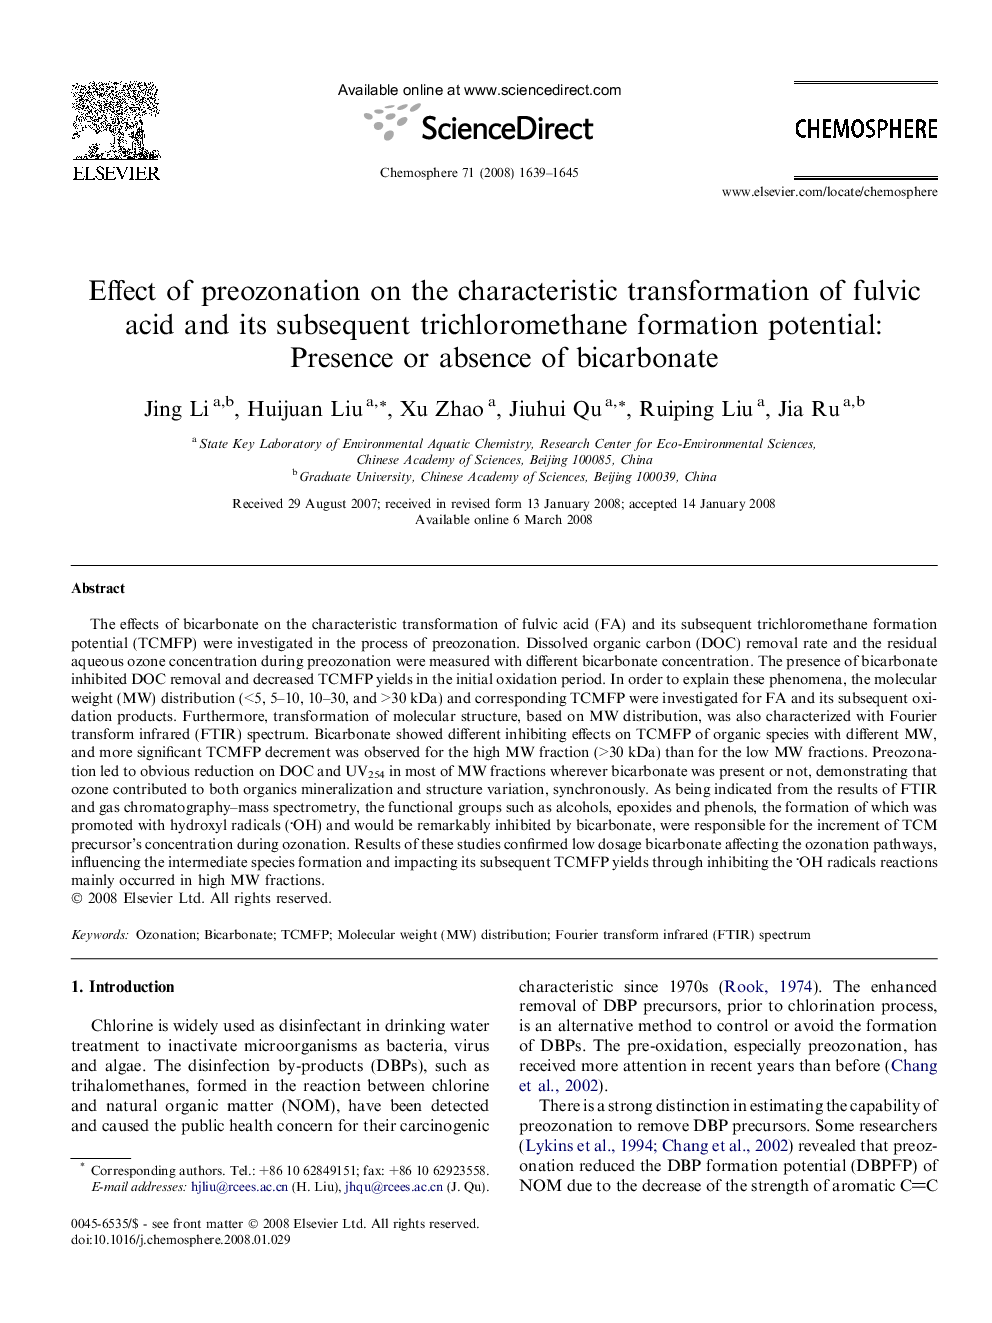 Effect of preozonation on the characteristic transformation of fulvic acid and its subsequent trichloromethane formation potential: Presence or absence of bicarbonate